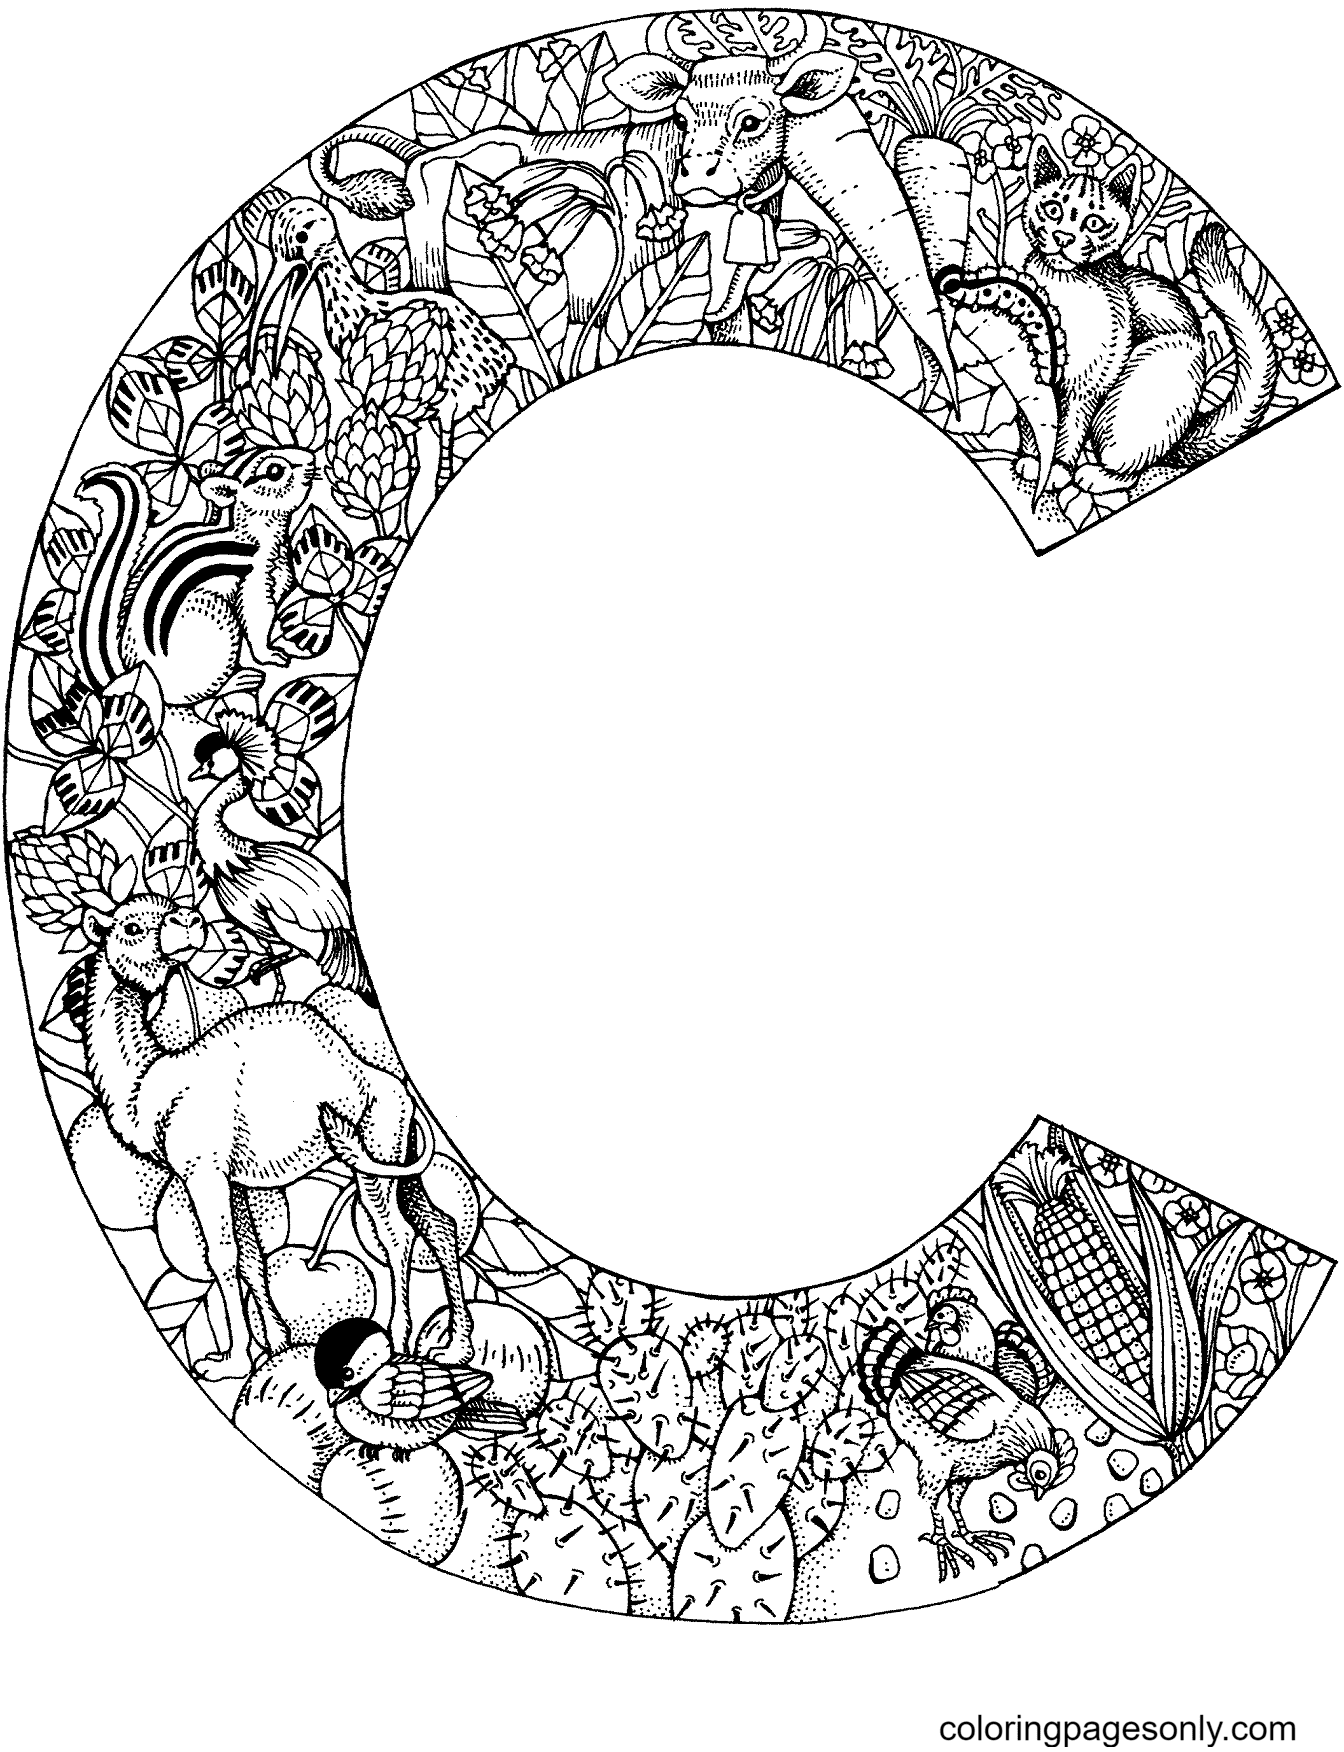 Letter C with Animals Coloring Page